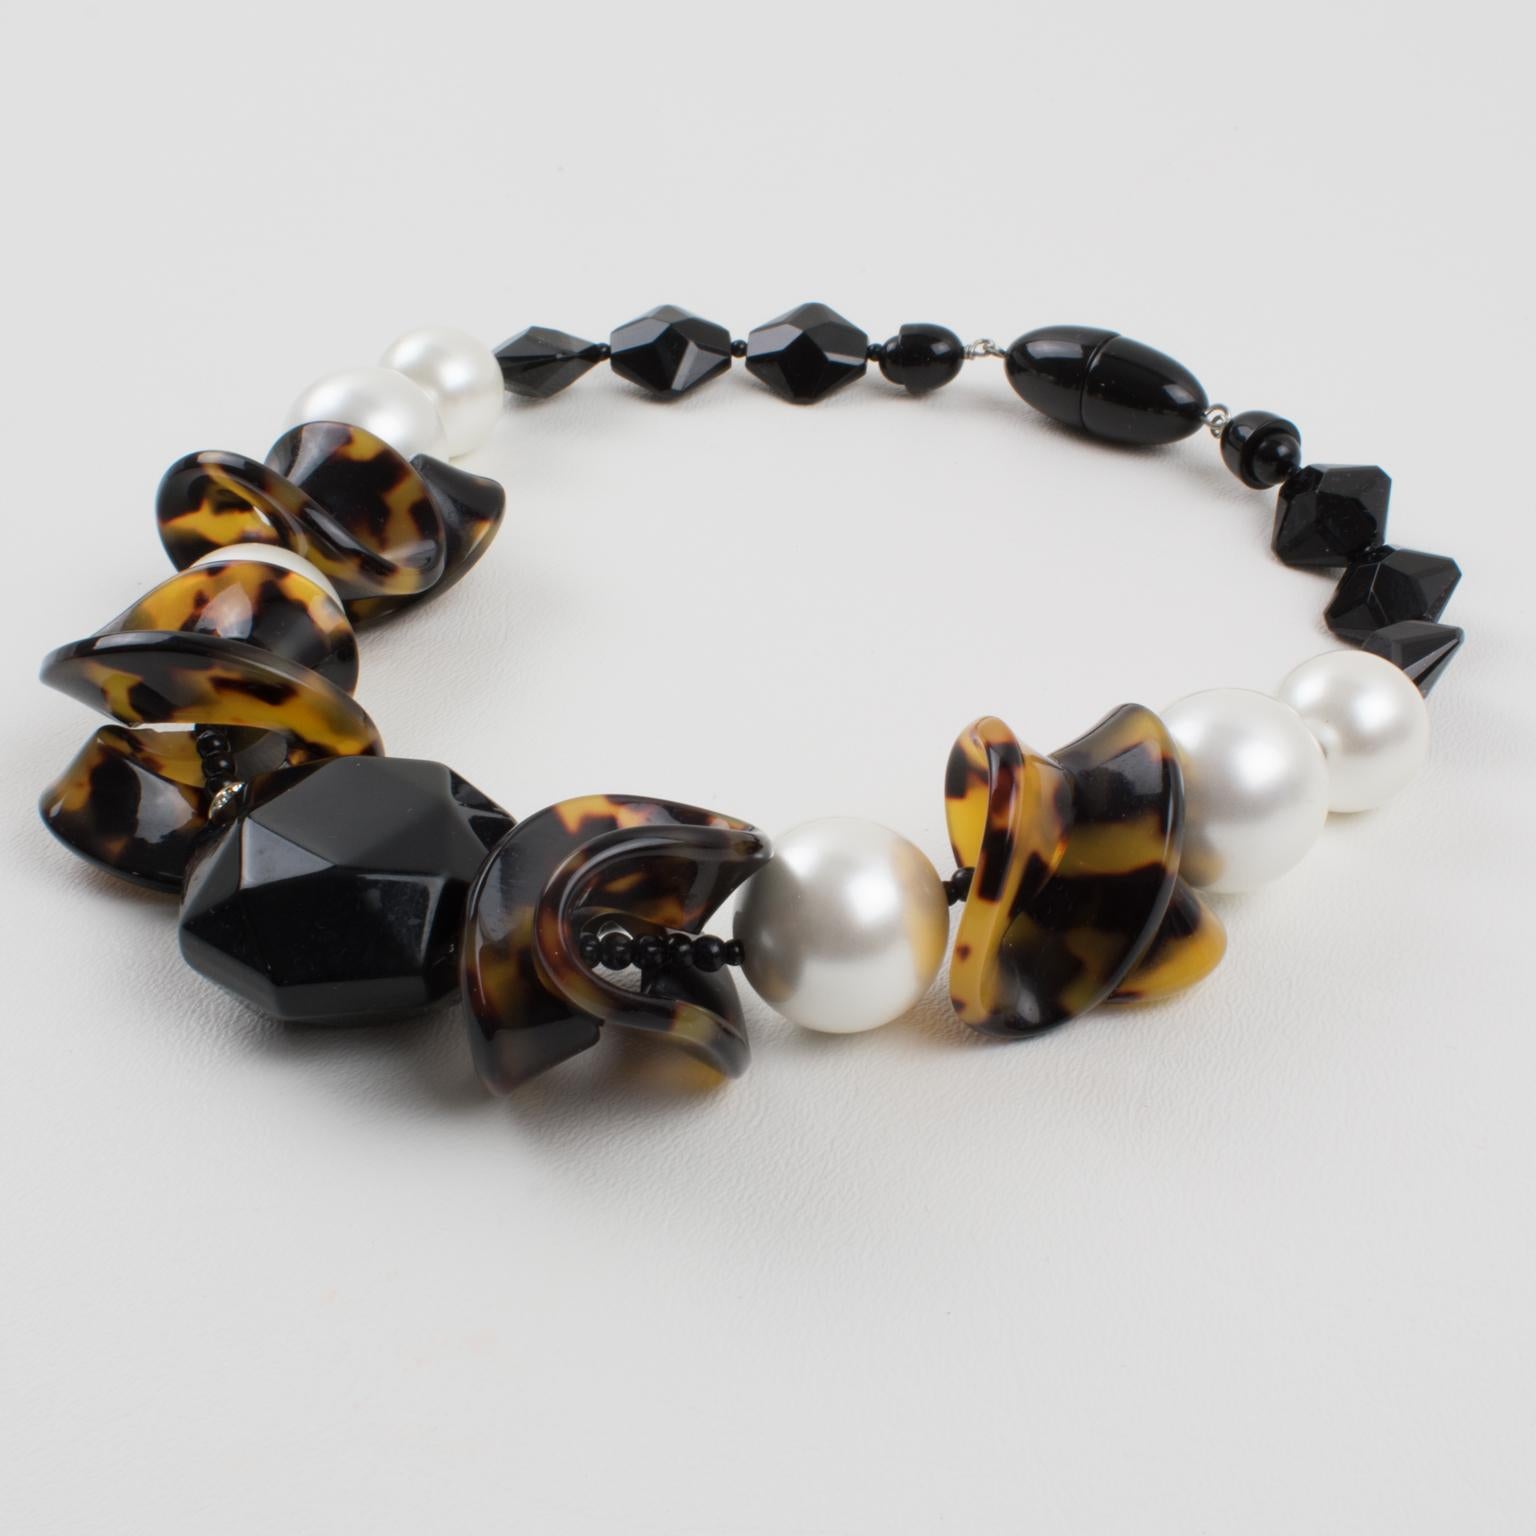 Modern Angela Caputi Tortoise Pearly and Black Lucite Choker Necklace